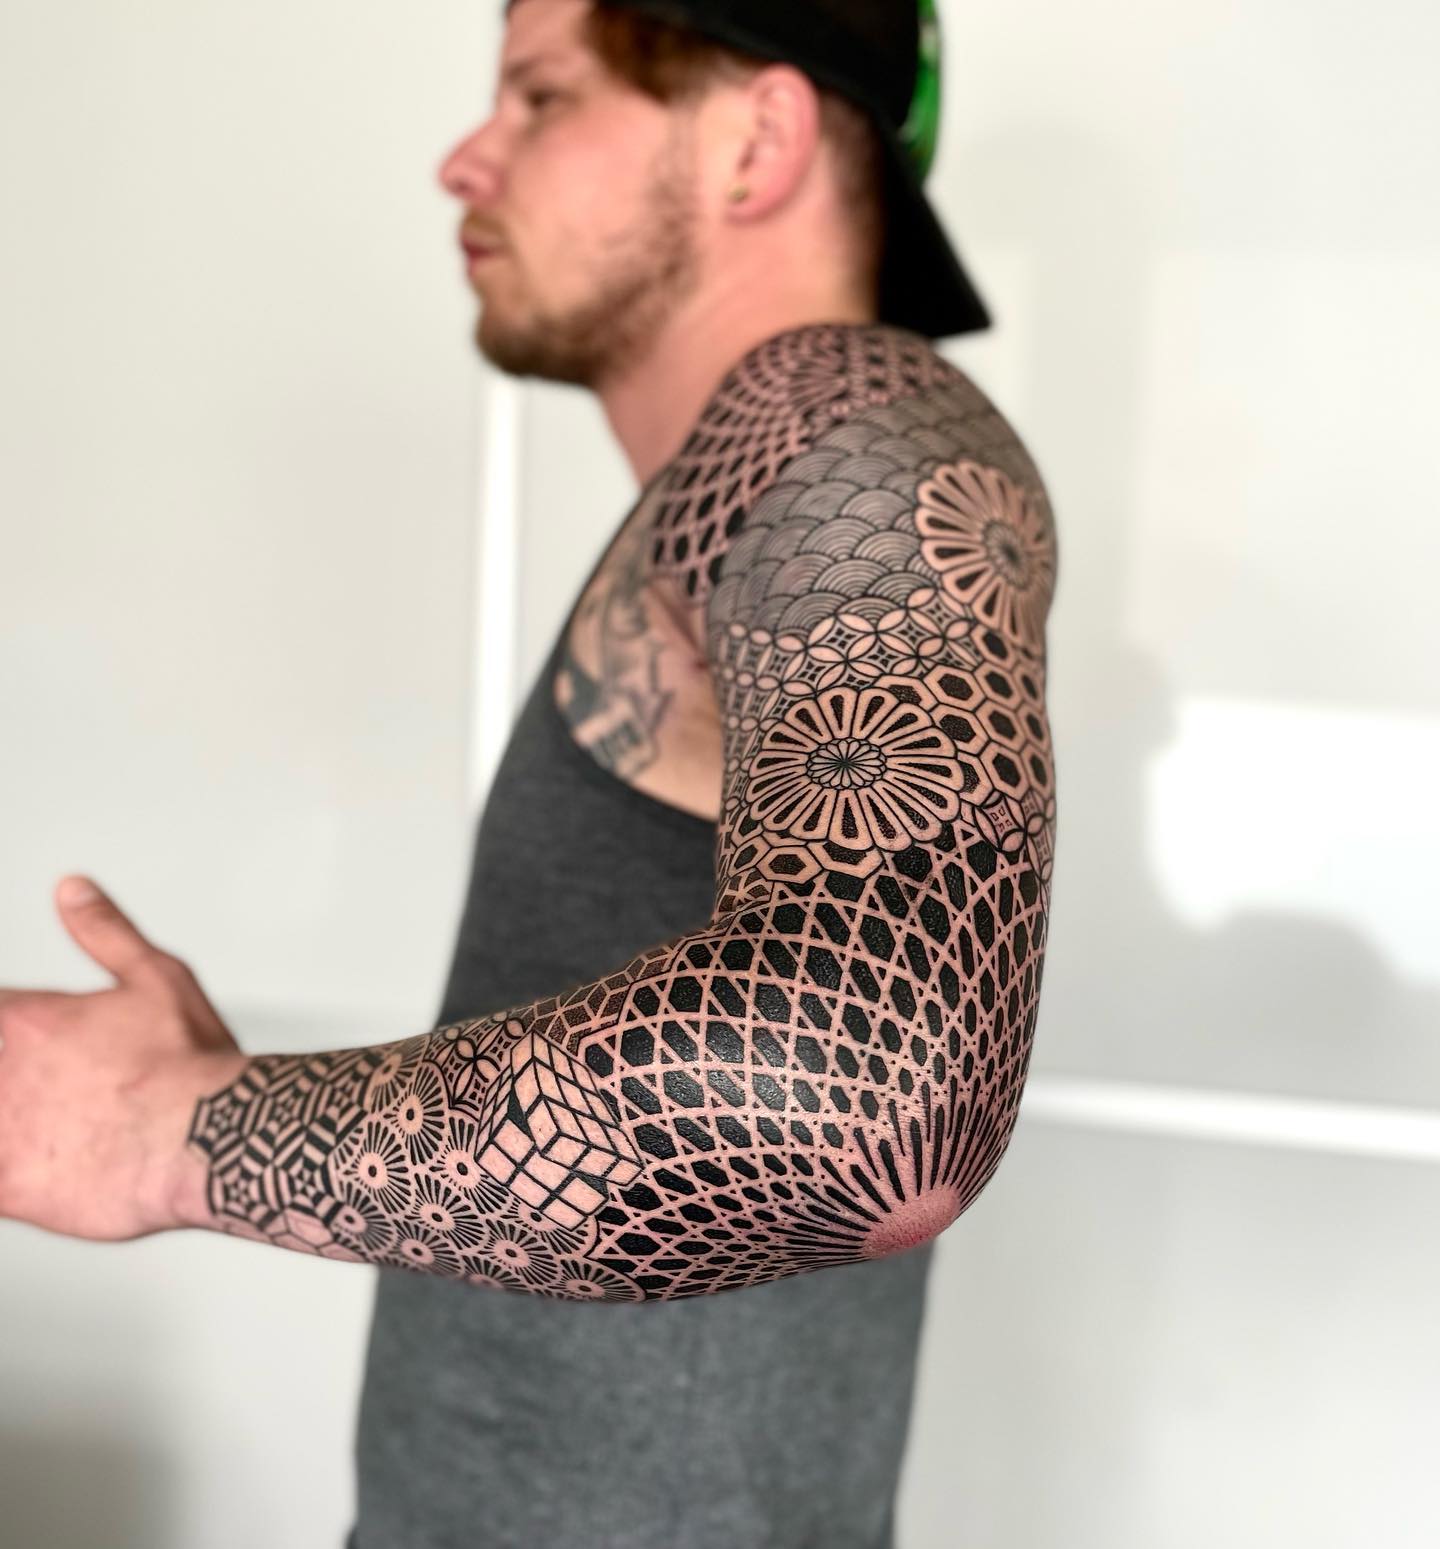 Mandalas placed all over your elbow will look amazing and bold. Do you like the placement and its style? This giant long tattoo is a time-consuming piece, often worn by those who like a sleeve or half-sleeve concept. Black ink is always a safe choice when it comes to big tattoos.